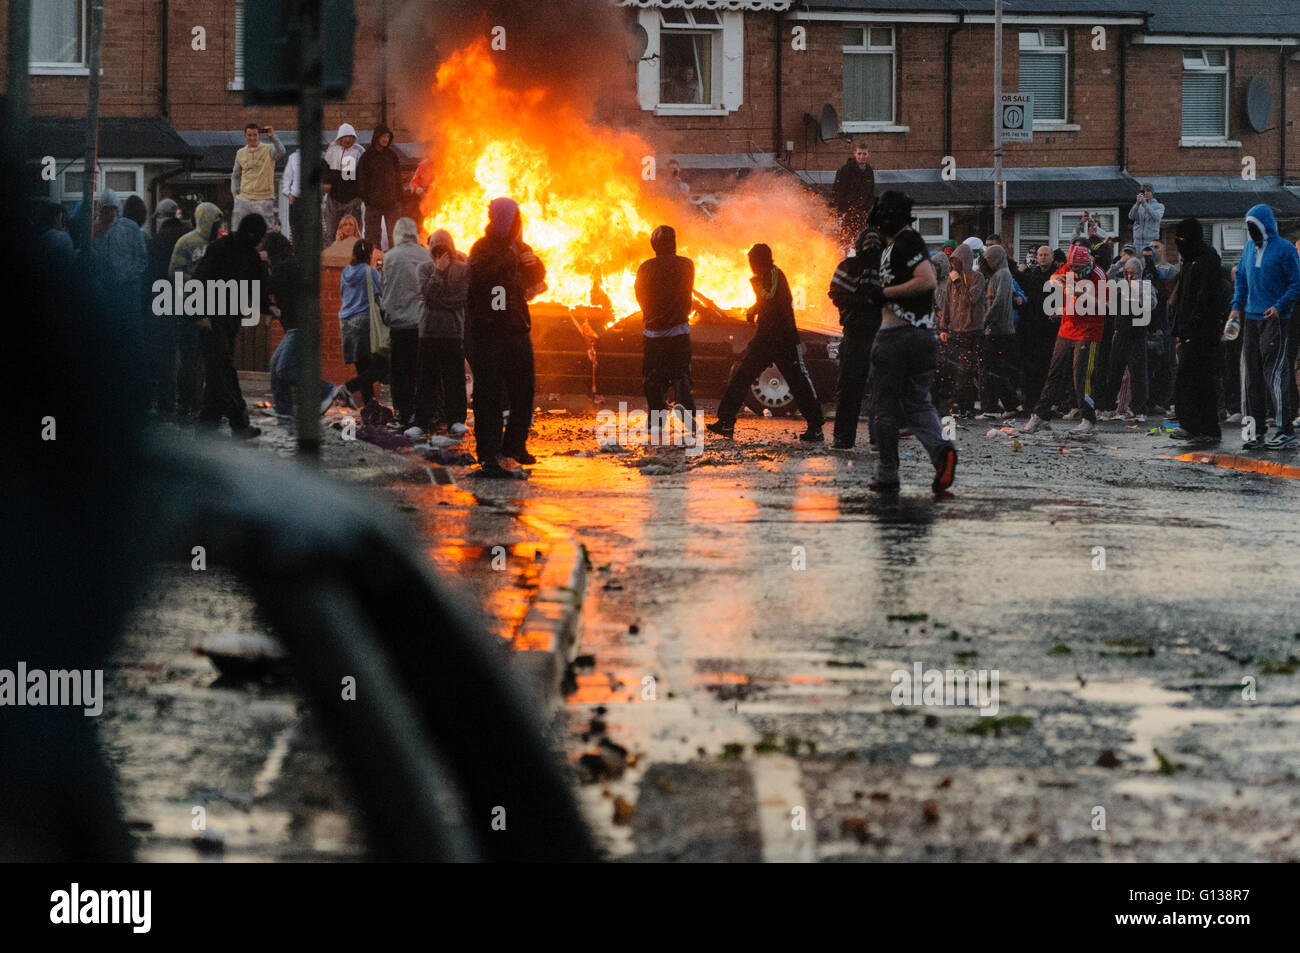 Belfast, Northern Ireland. 12 Jul 2011 - Nationalist youths from Ardoyne hikack and set fire to a car during a riot, after the annual Twelth of July parade, celebrating the Battle of the Boyne in 1690 was allowed to pass along the main Crumlin Road Stock Photo